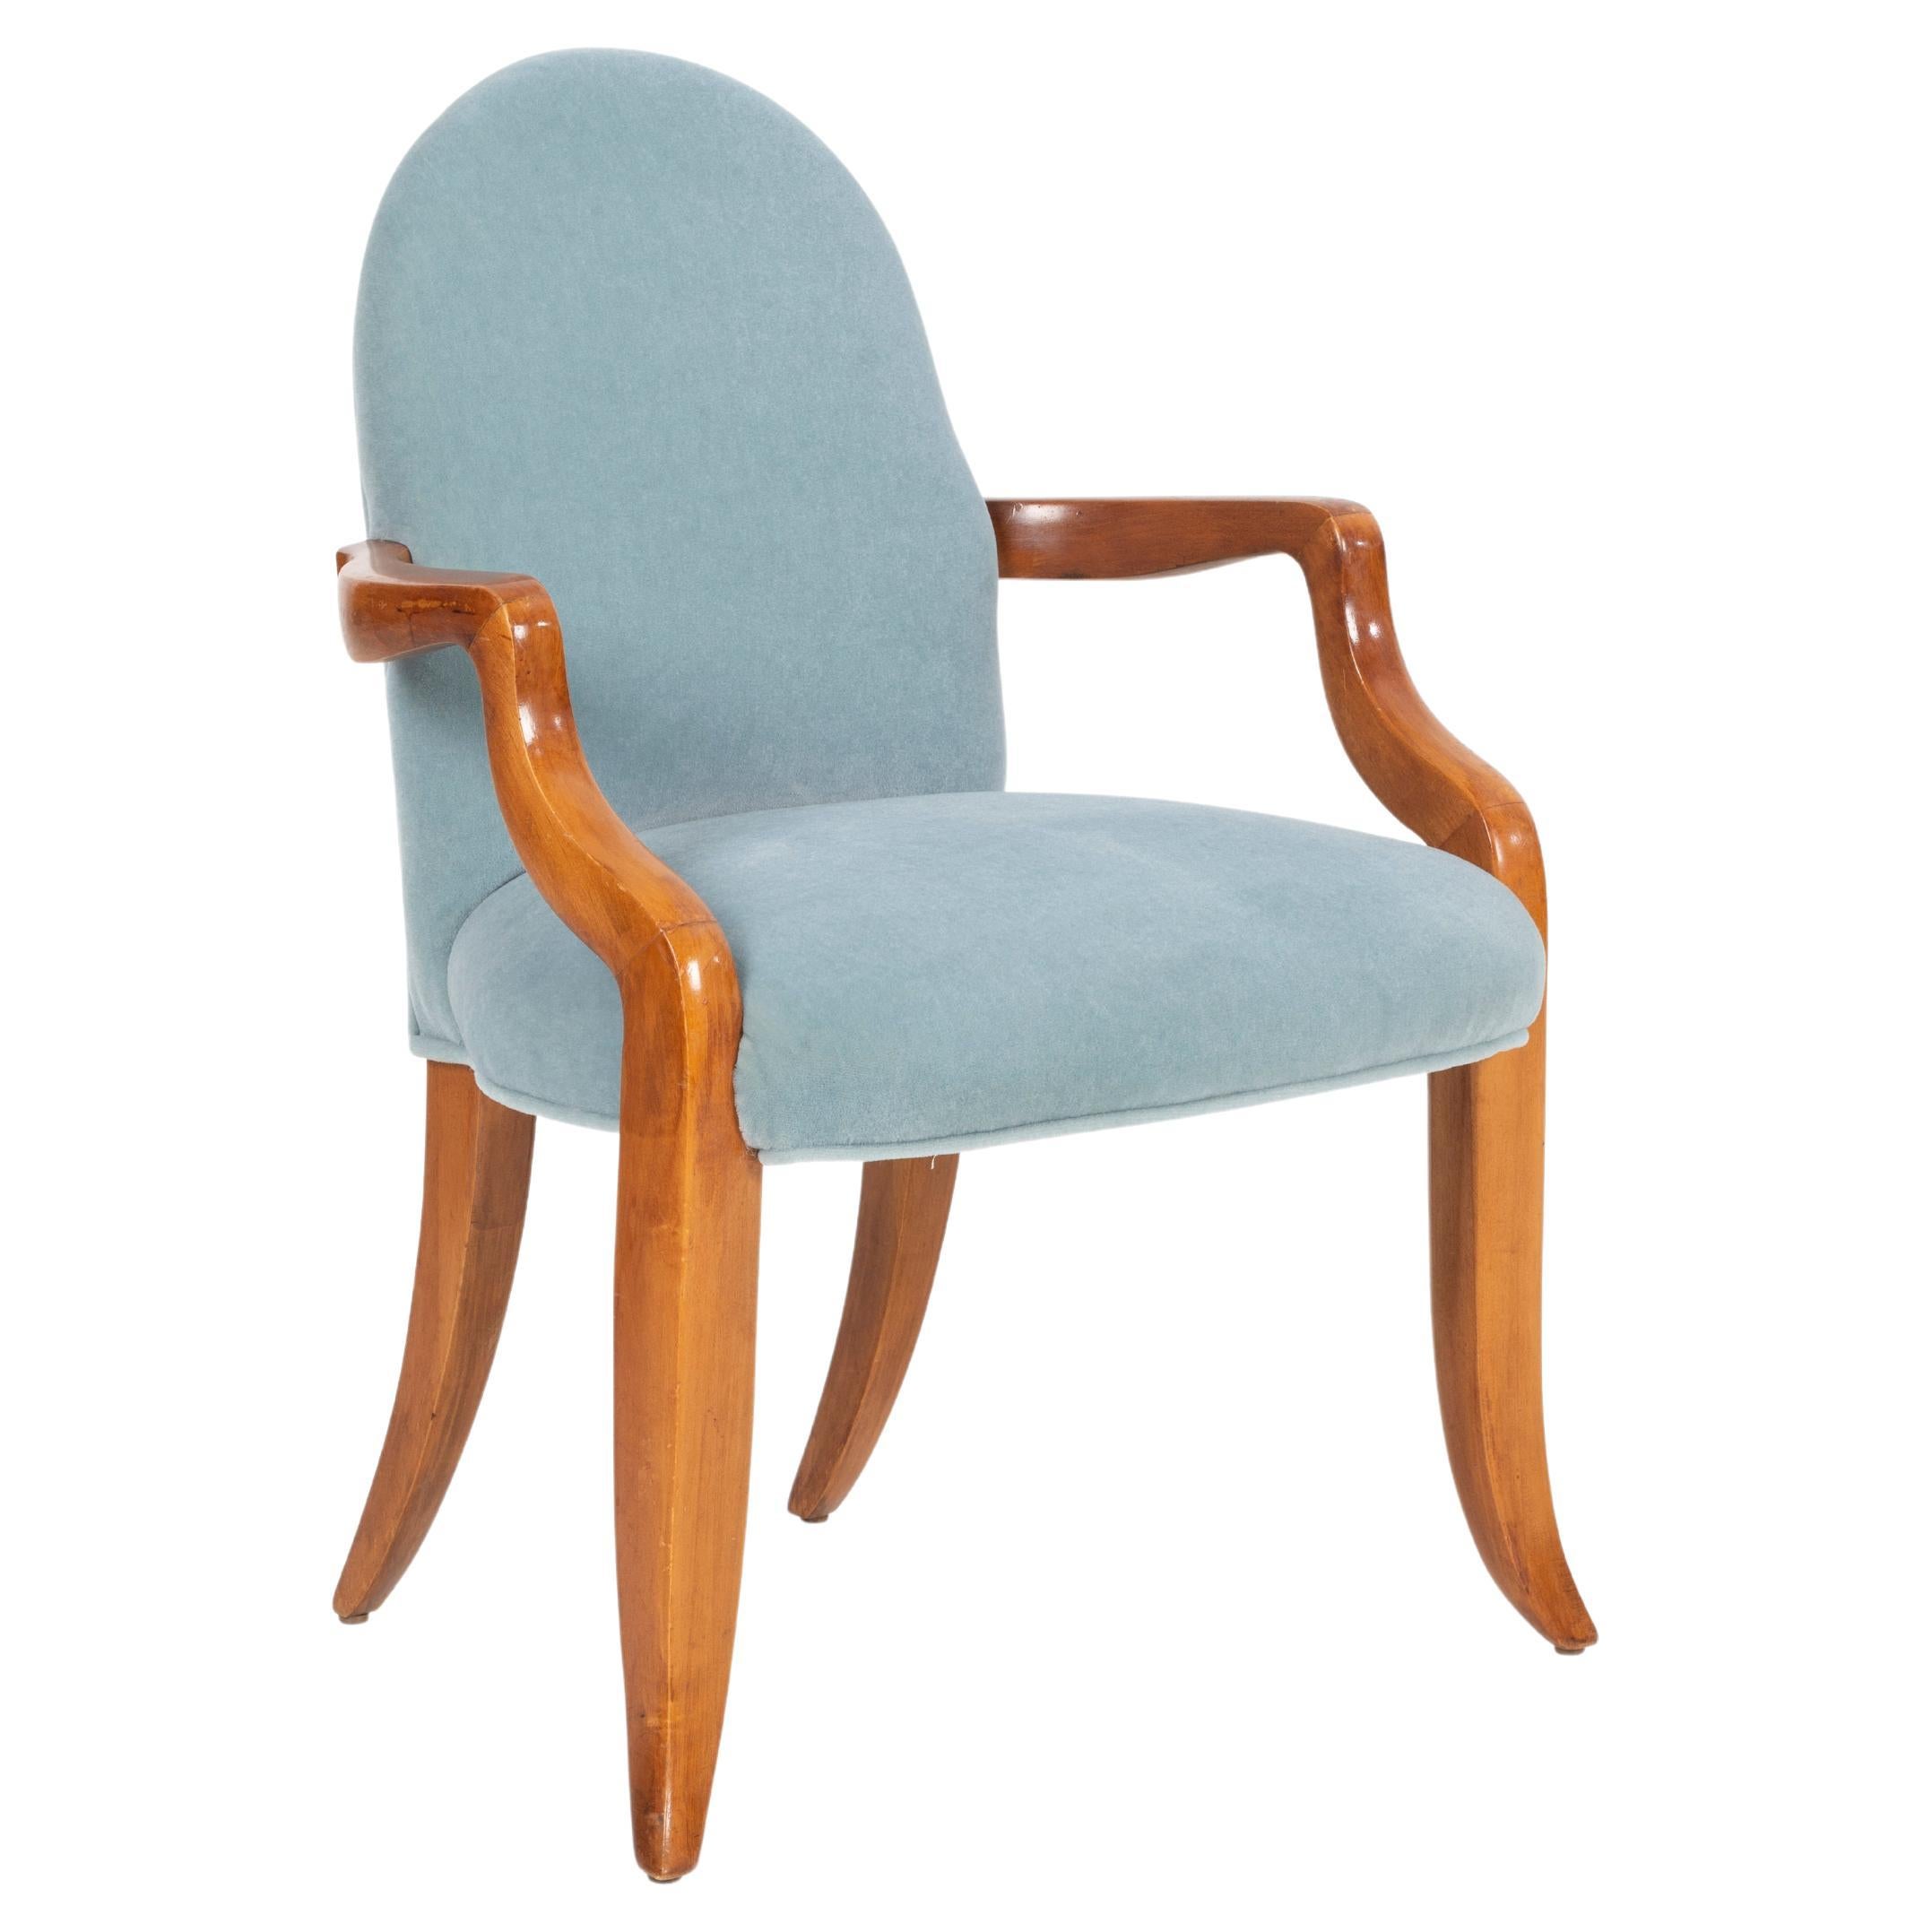 Wendell Castle Accent Chair For Sale